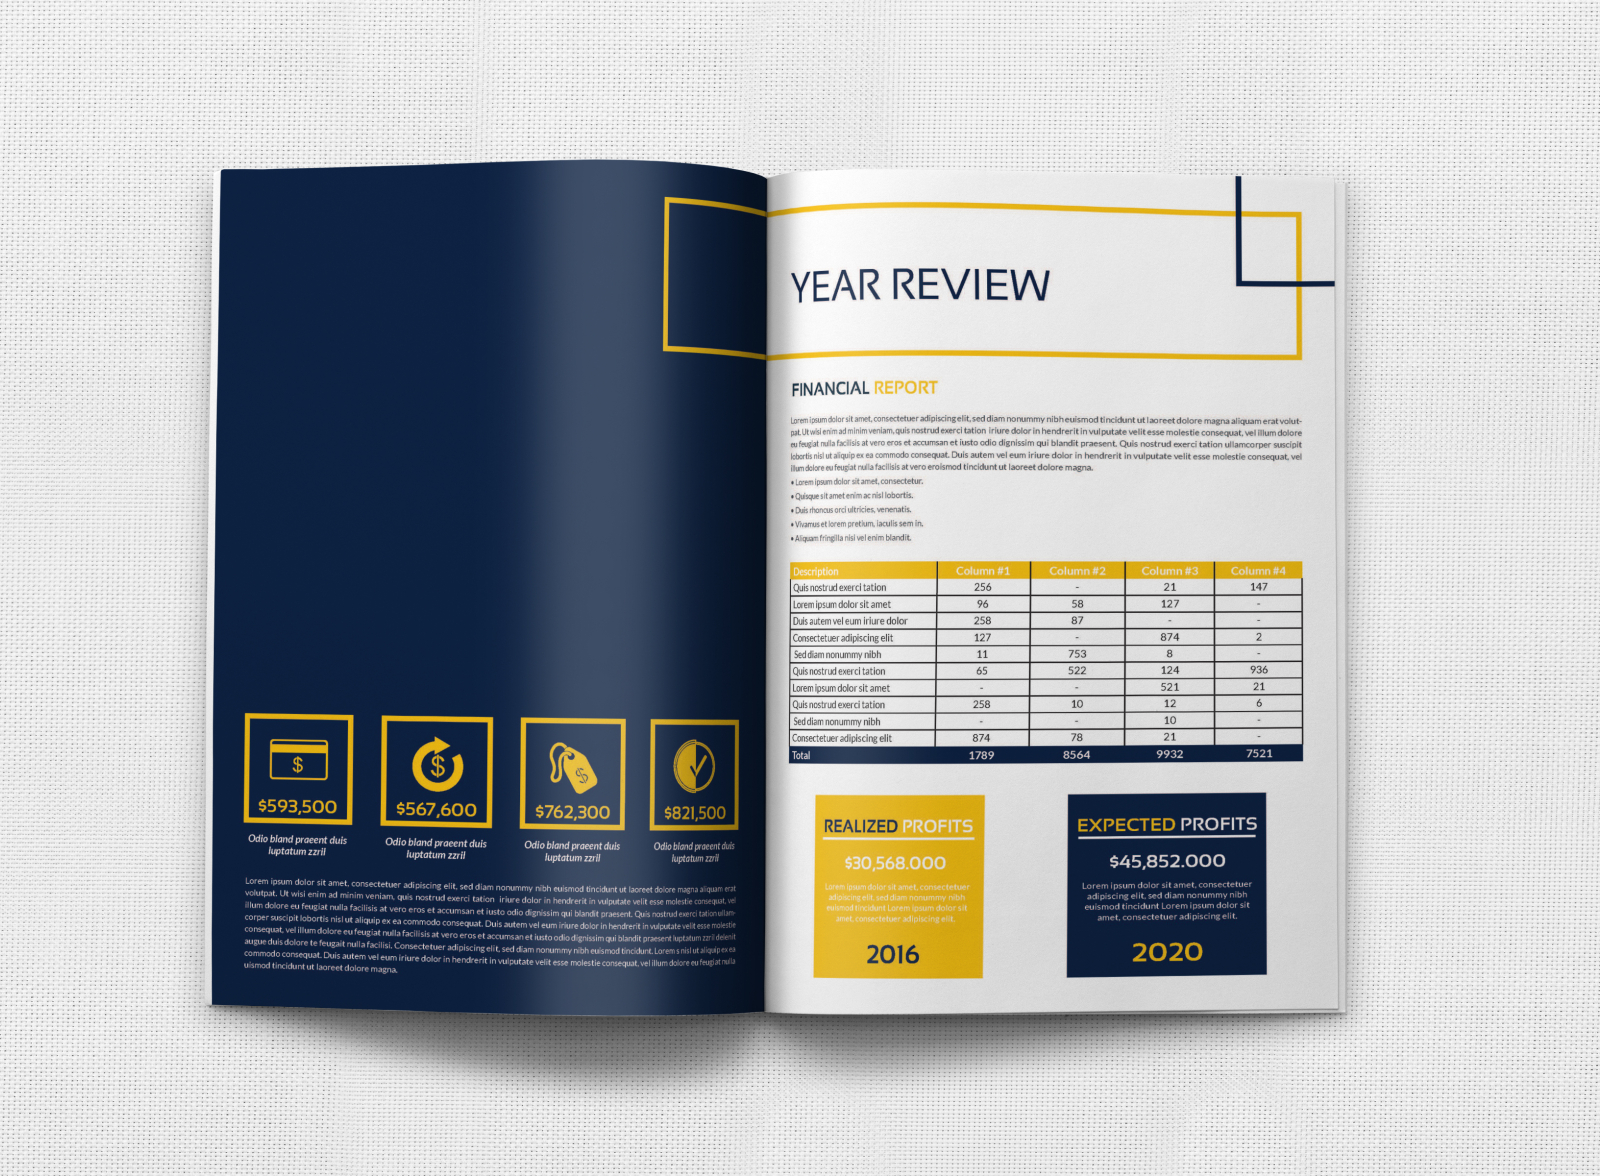 Download Annual Report Brochure Template by OWPictures on Dribbble